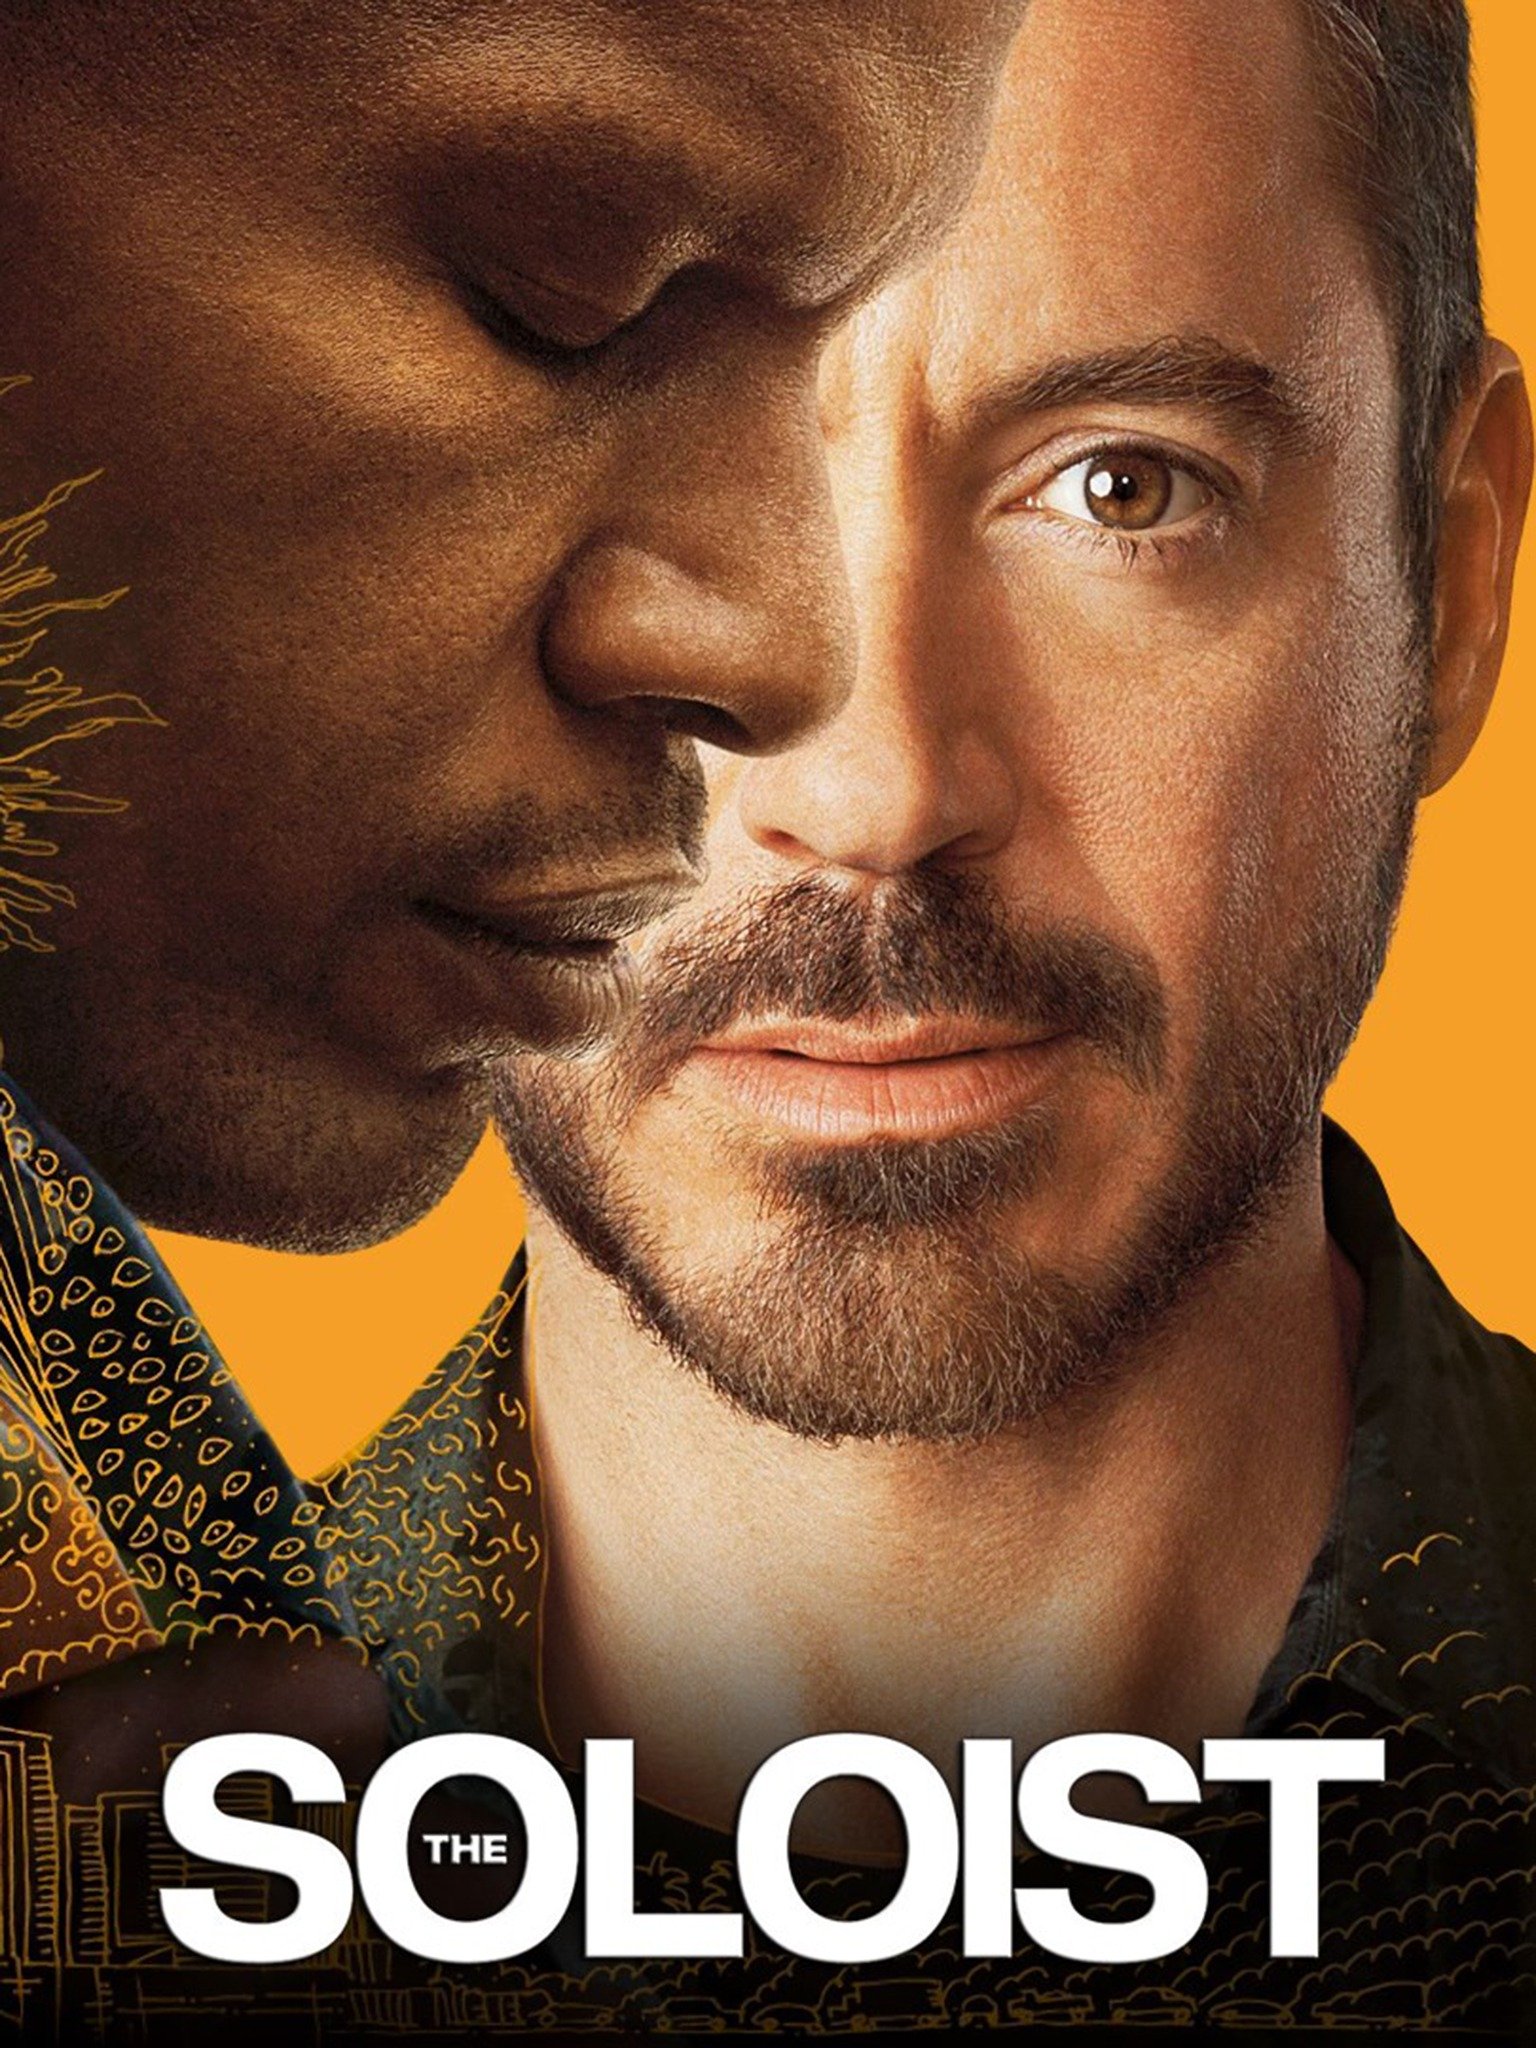 MOVIE REVIEW: The Soloist - 1 star